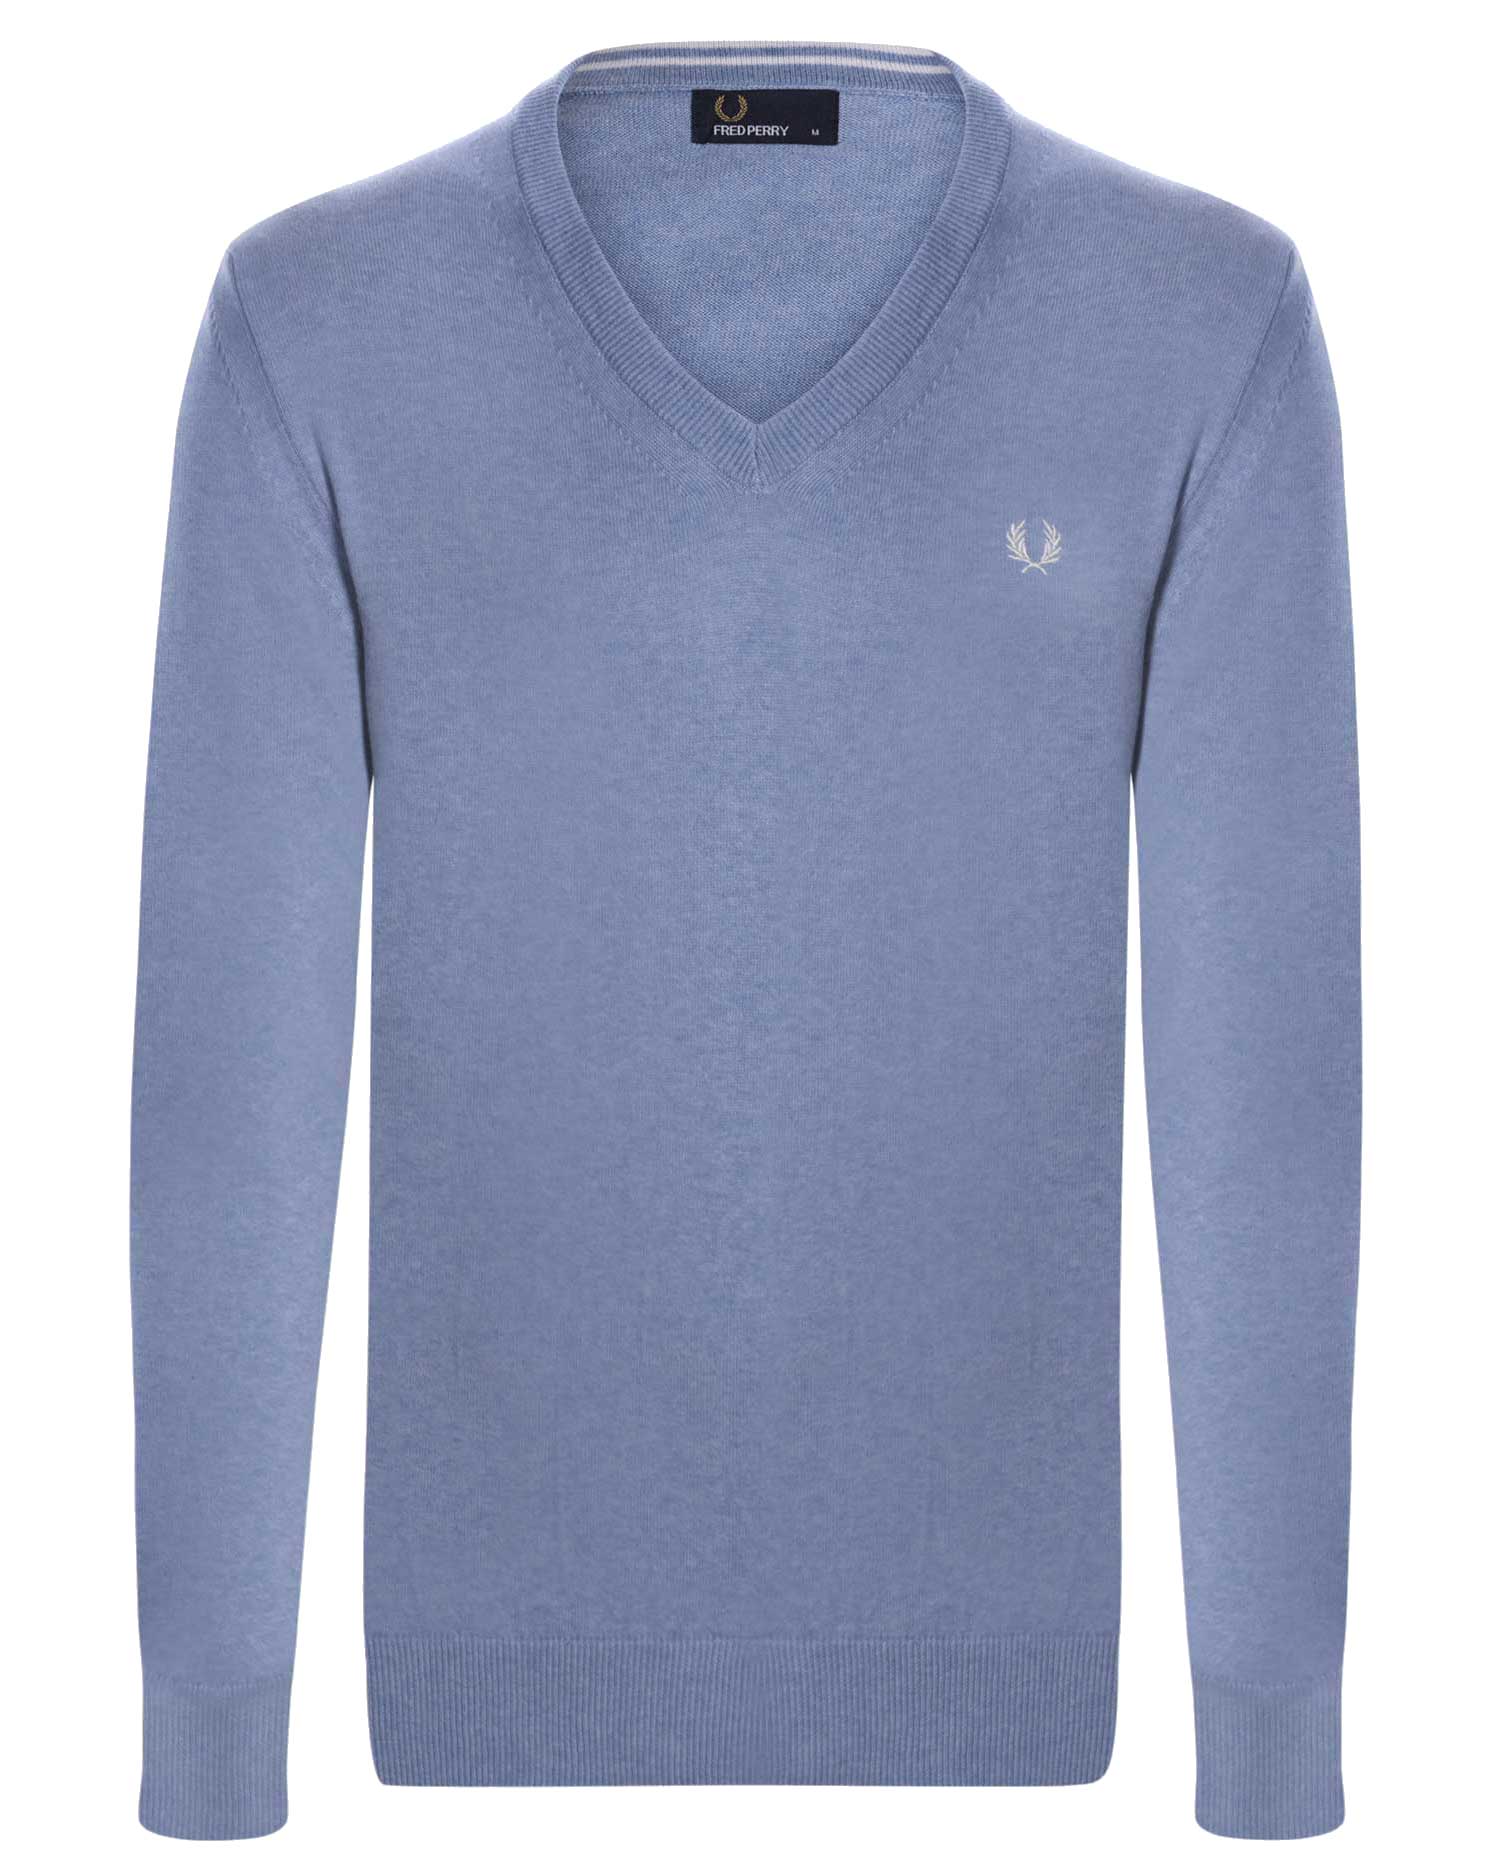 PULL FRED PERRY - BLEU CHINE